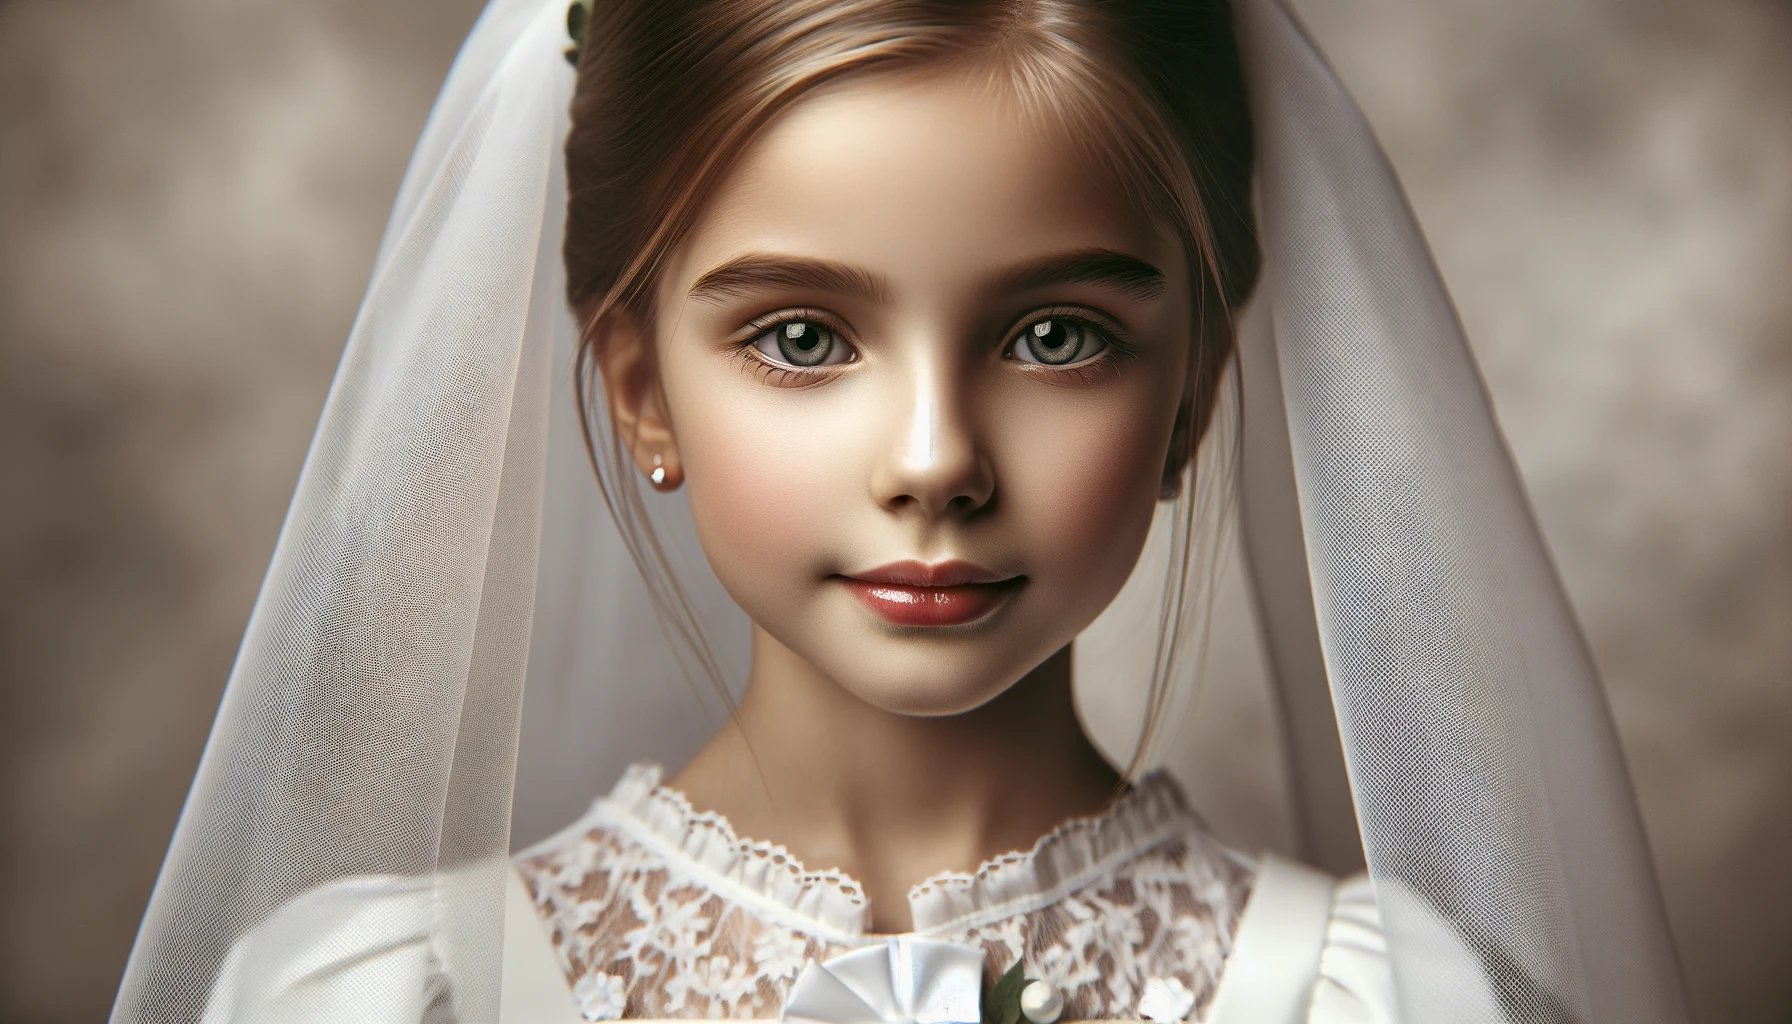 At What Age Do You Get First Communion